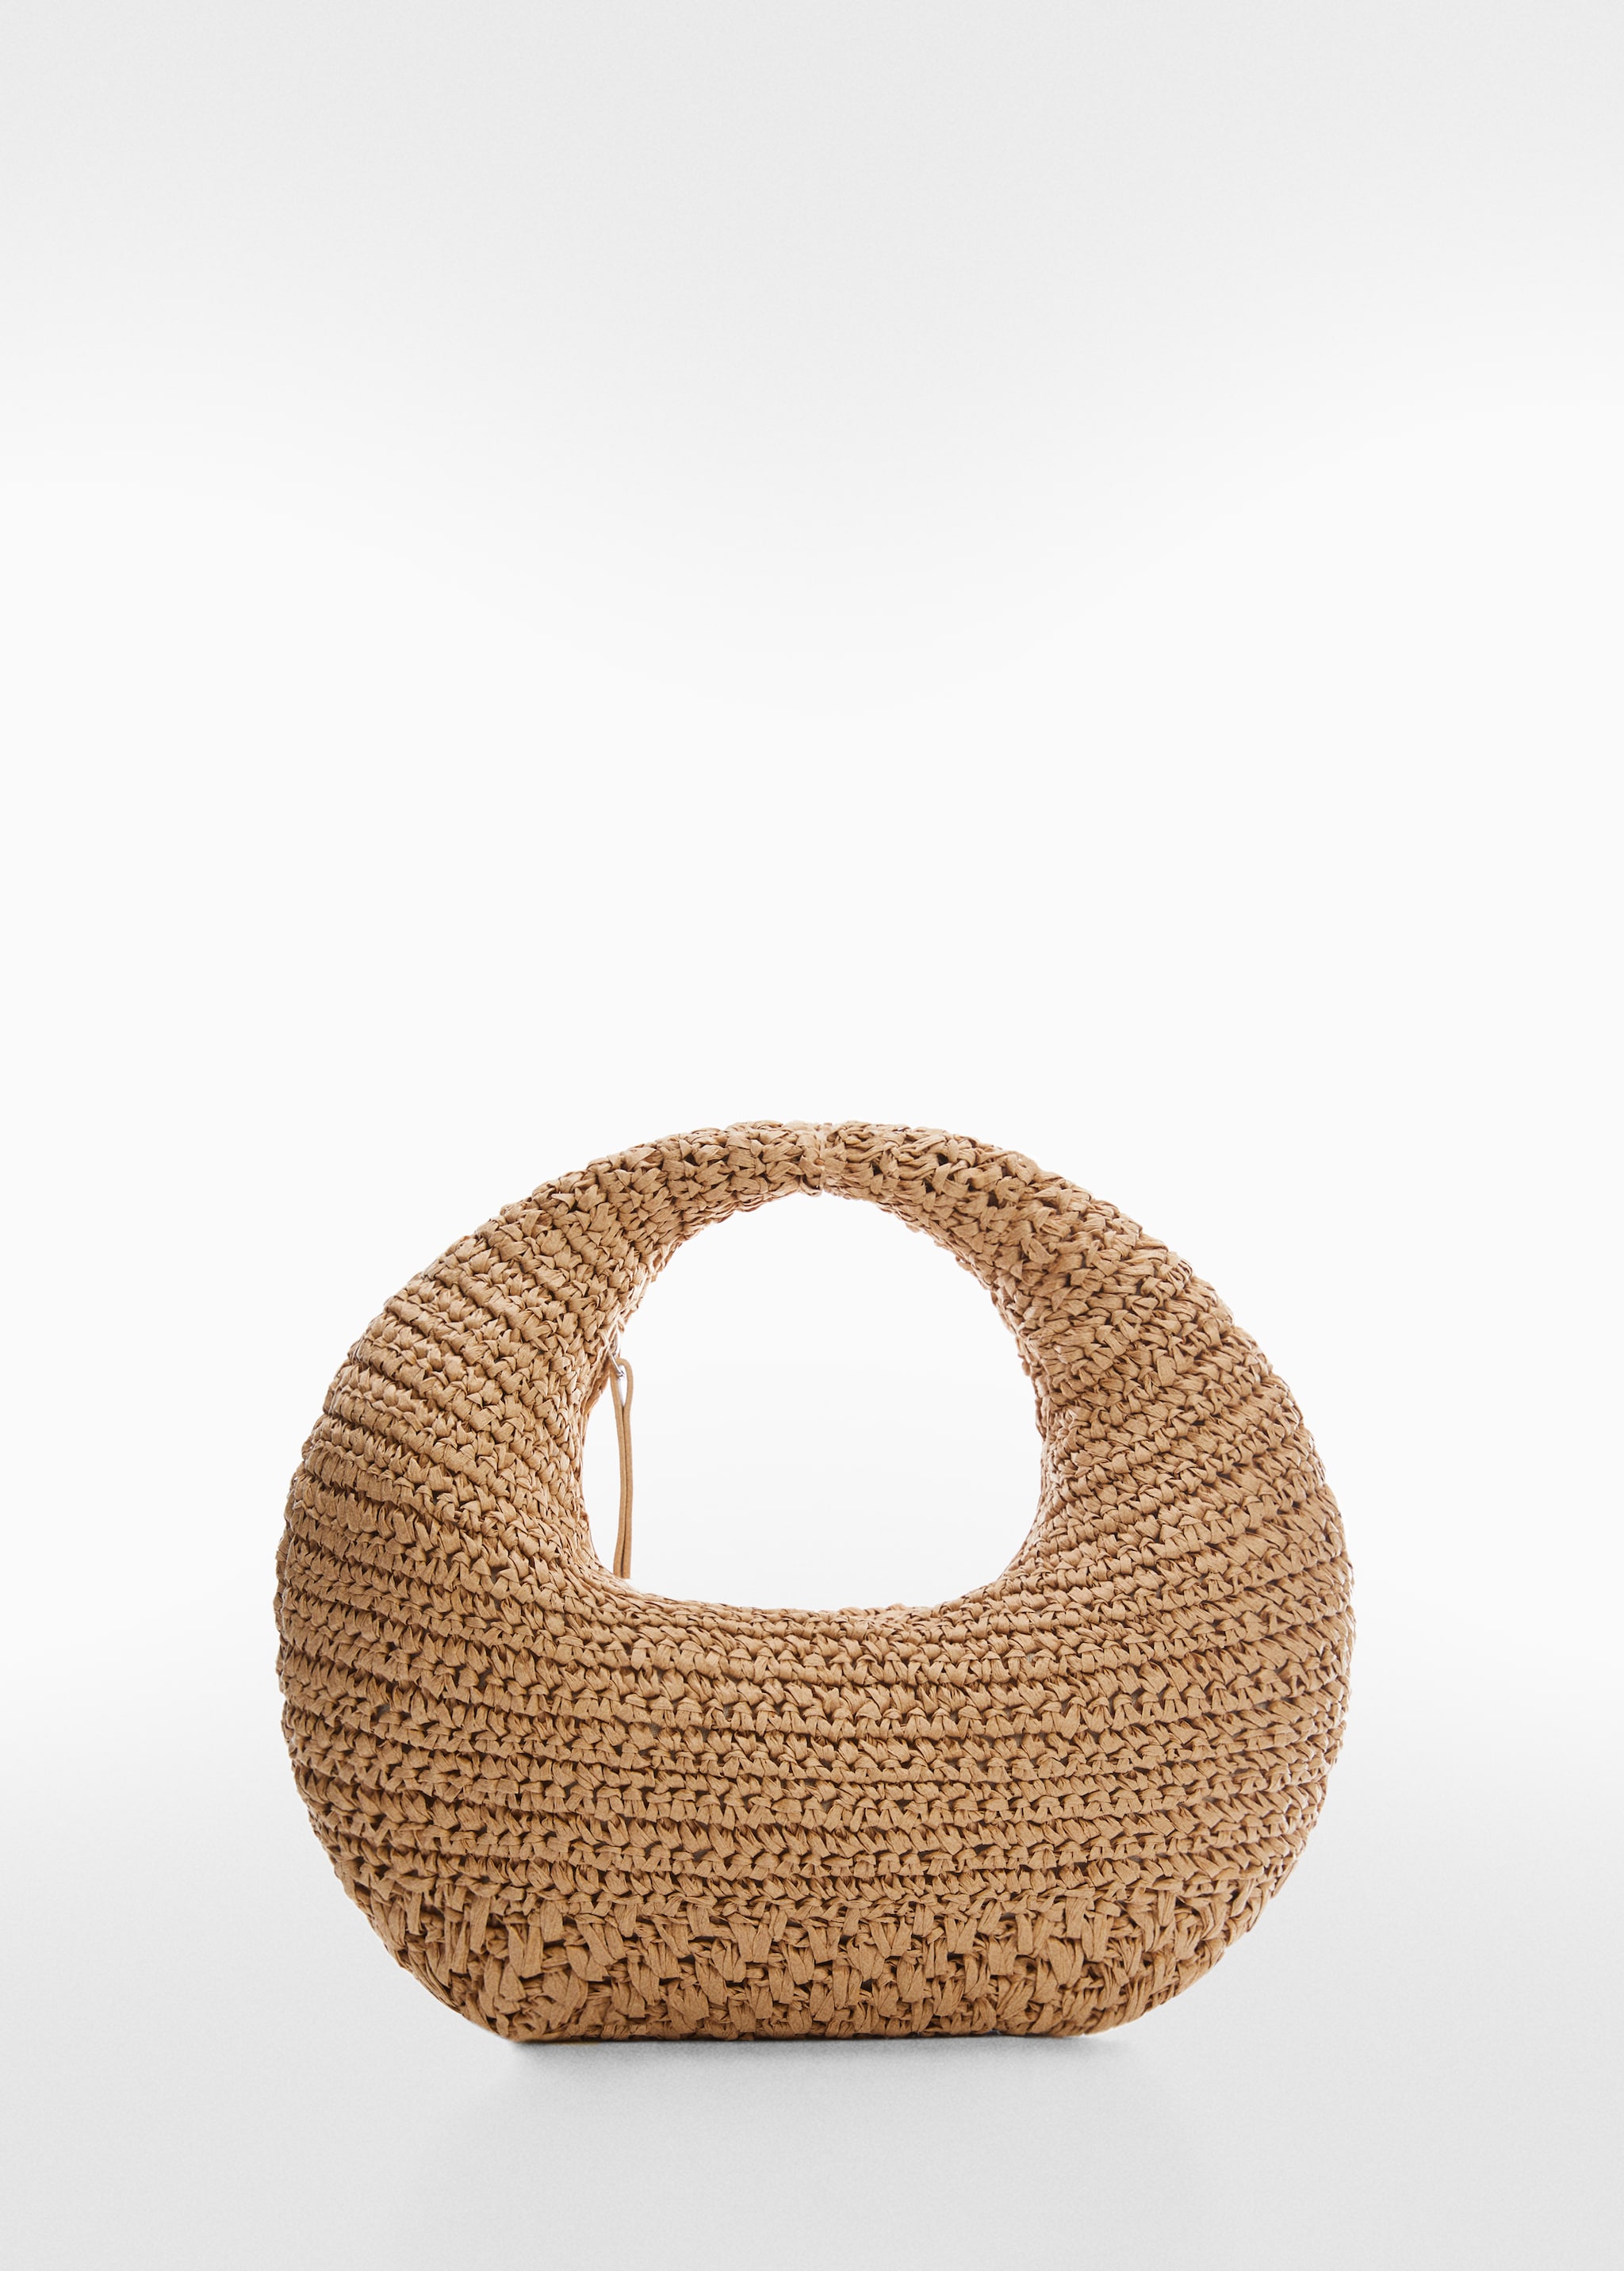 Round natural fibre bag - Article without model